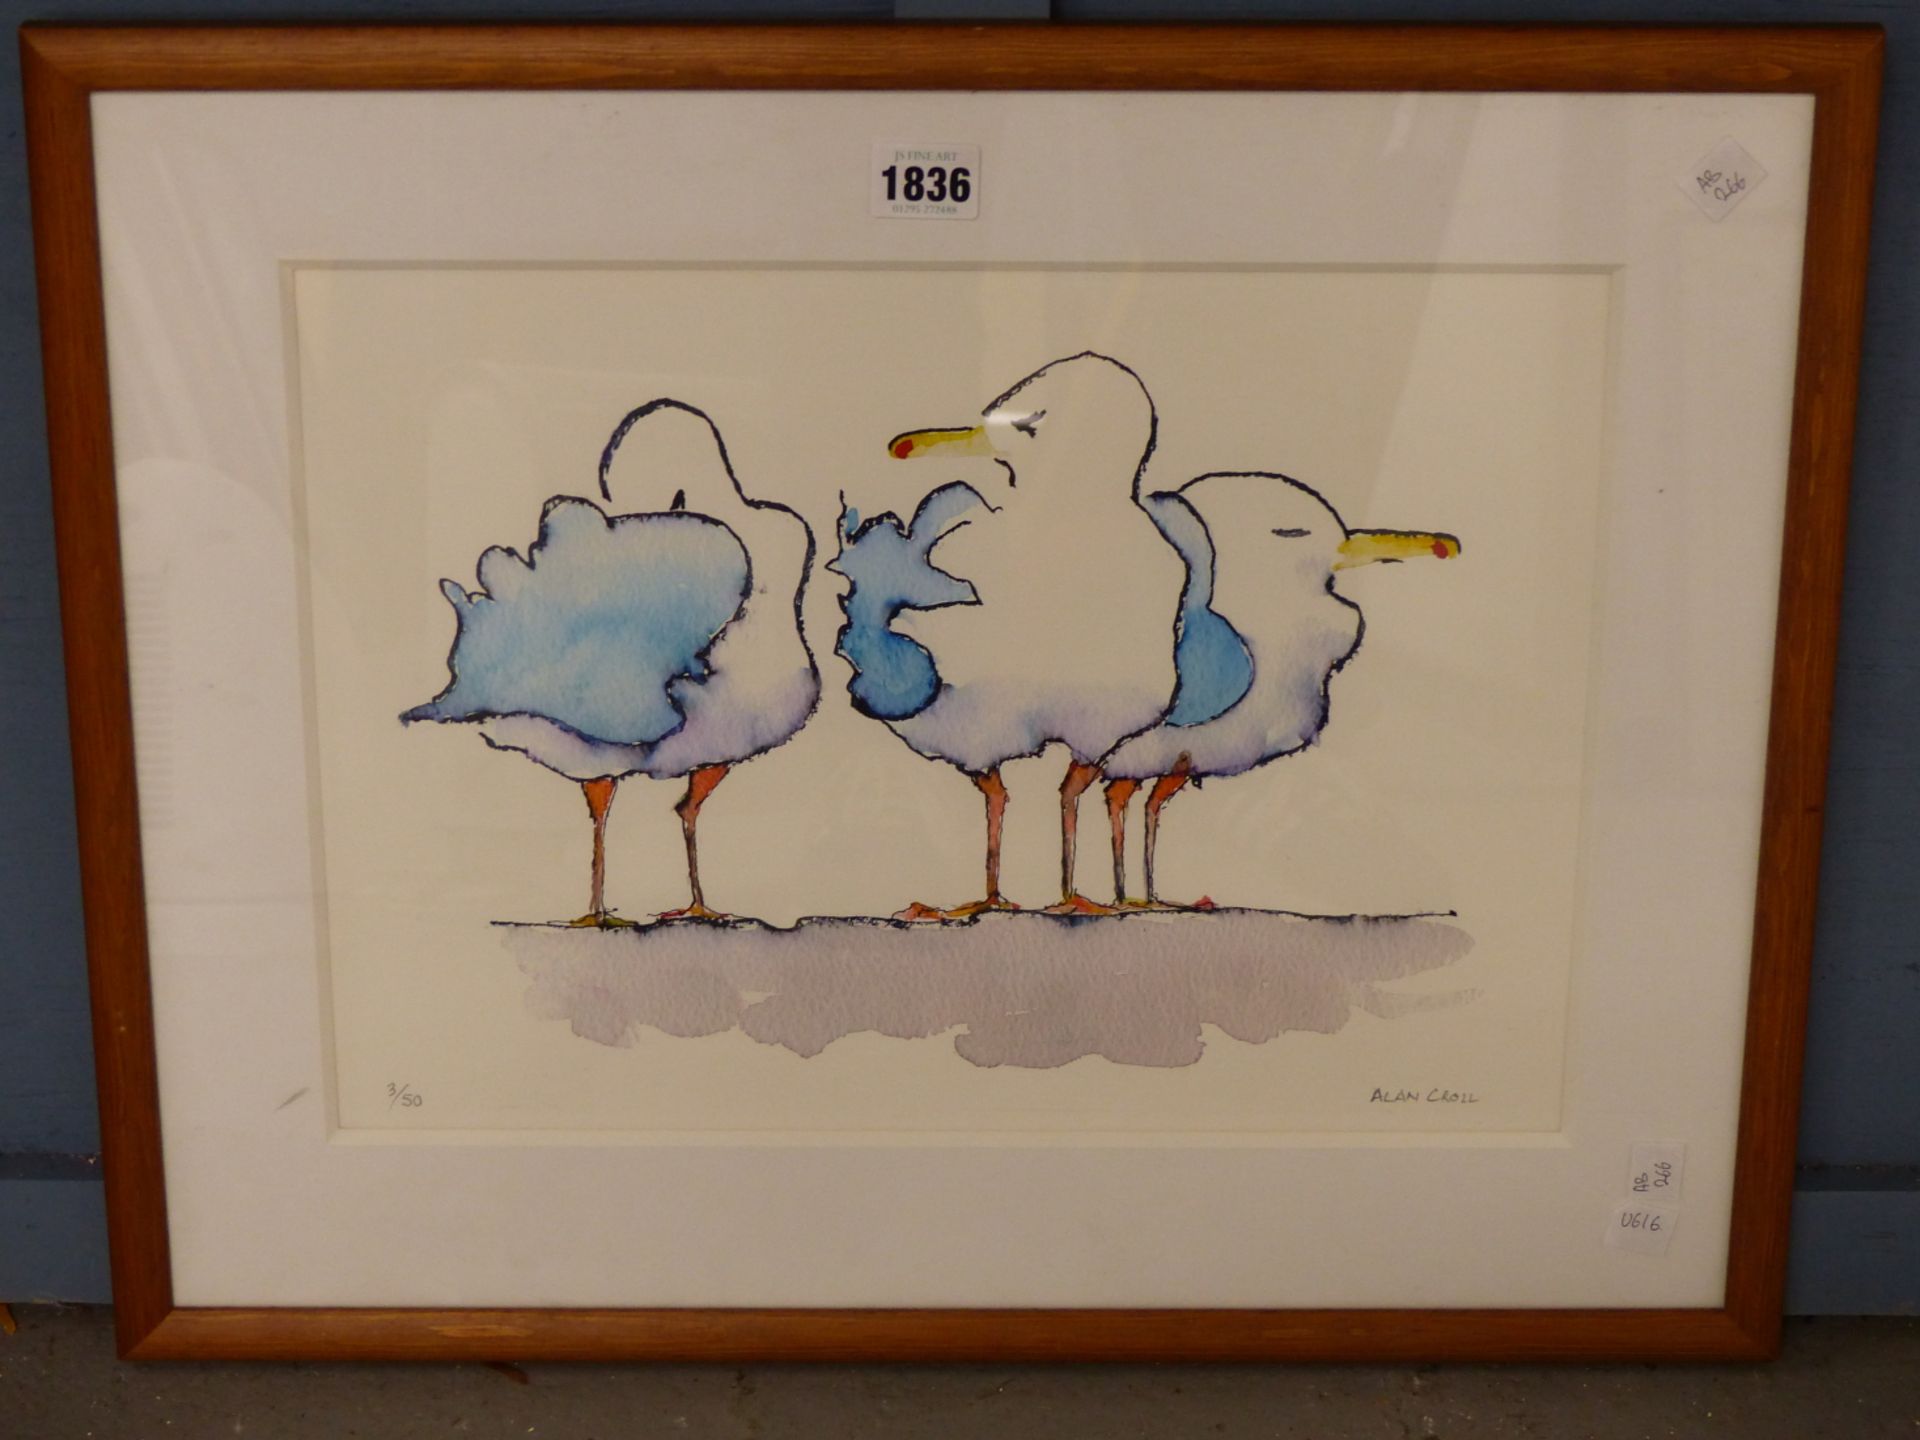 ALAN CROLL (20TH/21ST CENTURY), SEAGULLS, SIGNED AND NUMBERED 3/50 IN PENCIL, COLOUR PRINT, 38 X - Image 2 of 5